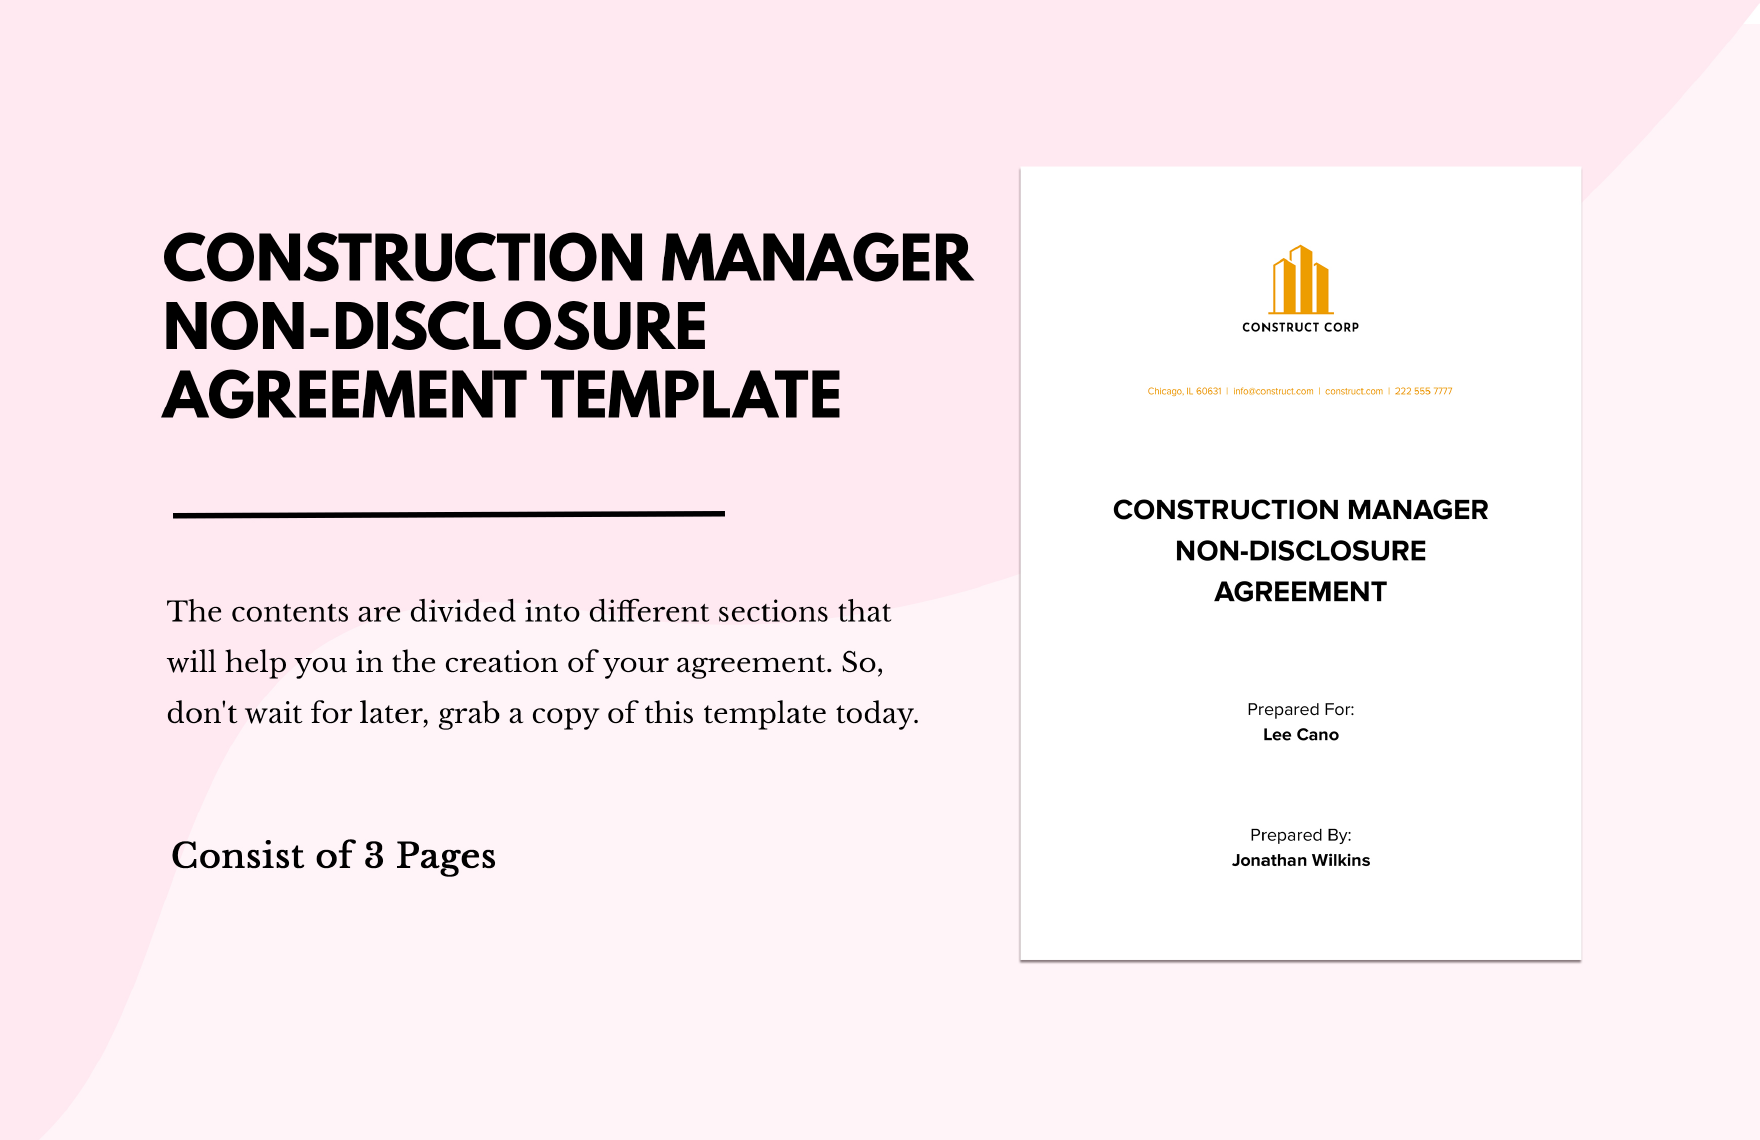 Construction Manager Non-Disclosure Agreement 